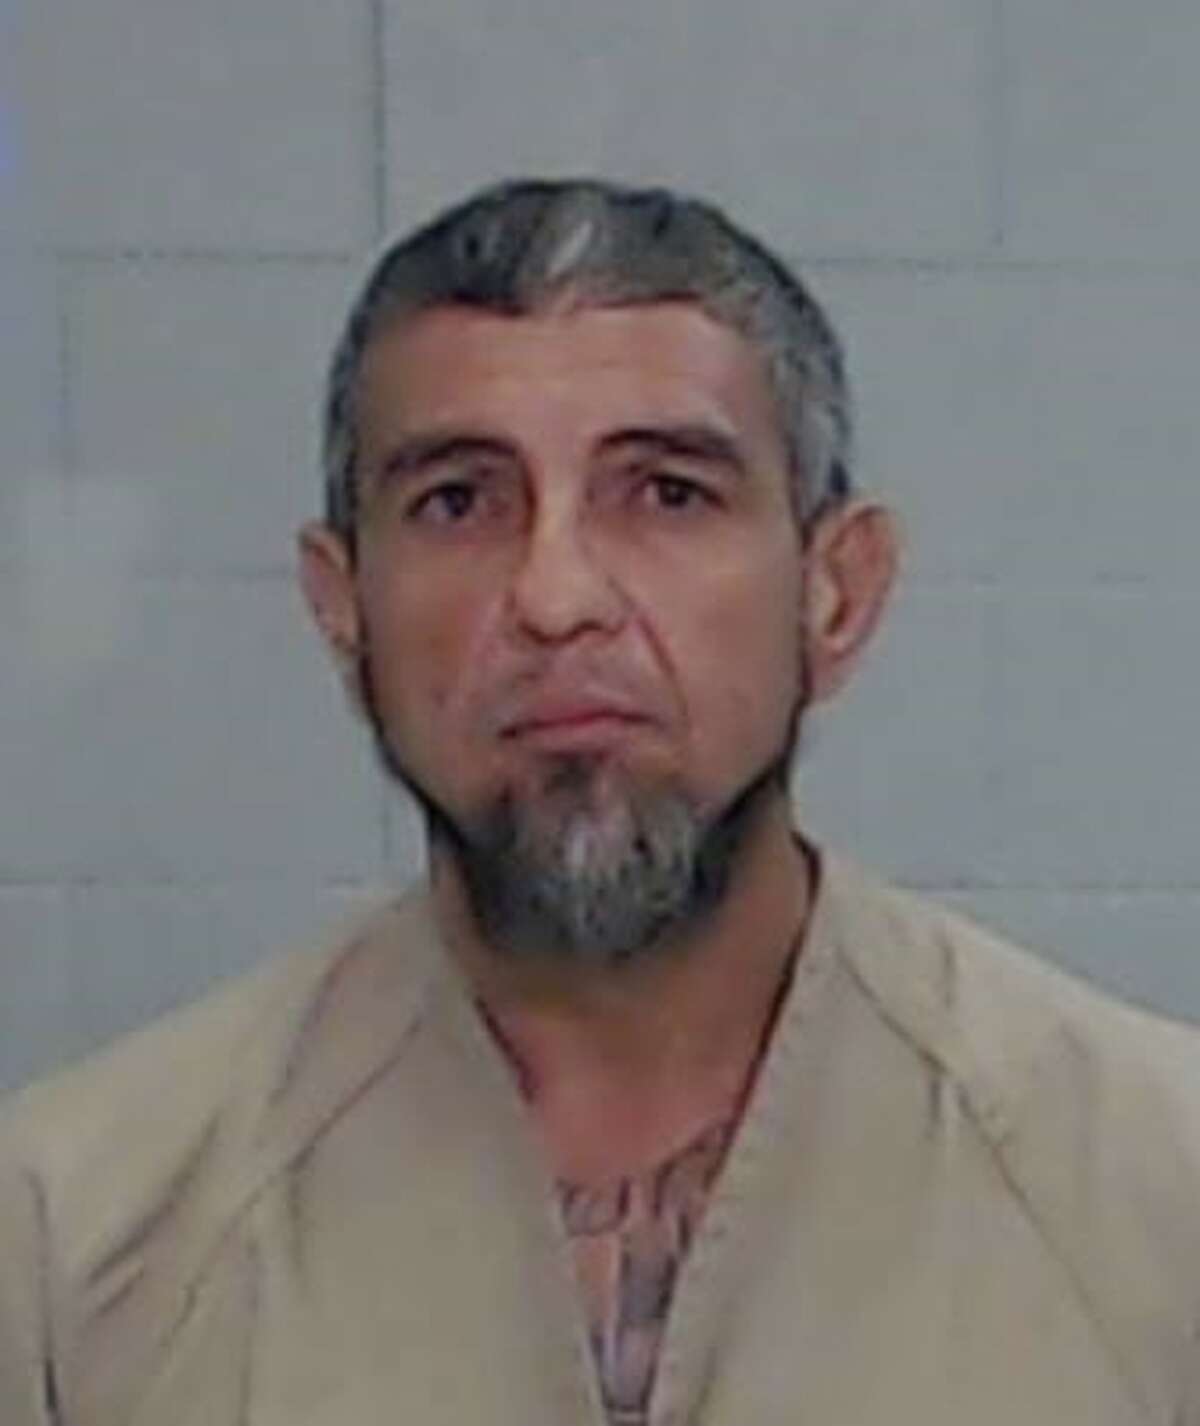 Conrad Cortez, 42,  was charged with burglary of a habitation, a second-degree felony, according to a release from Odessa Police Department.